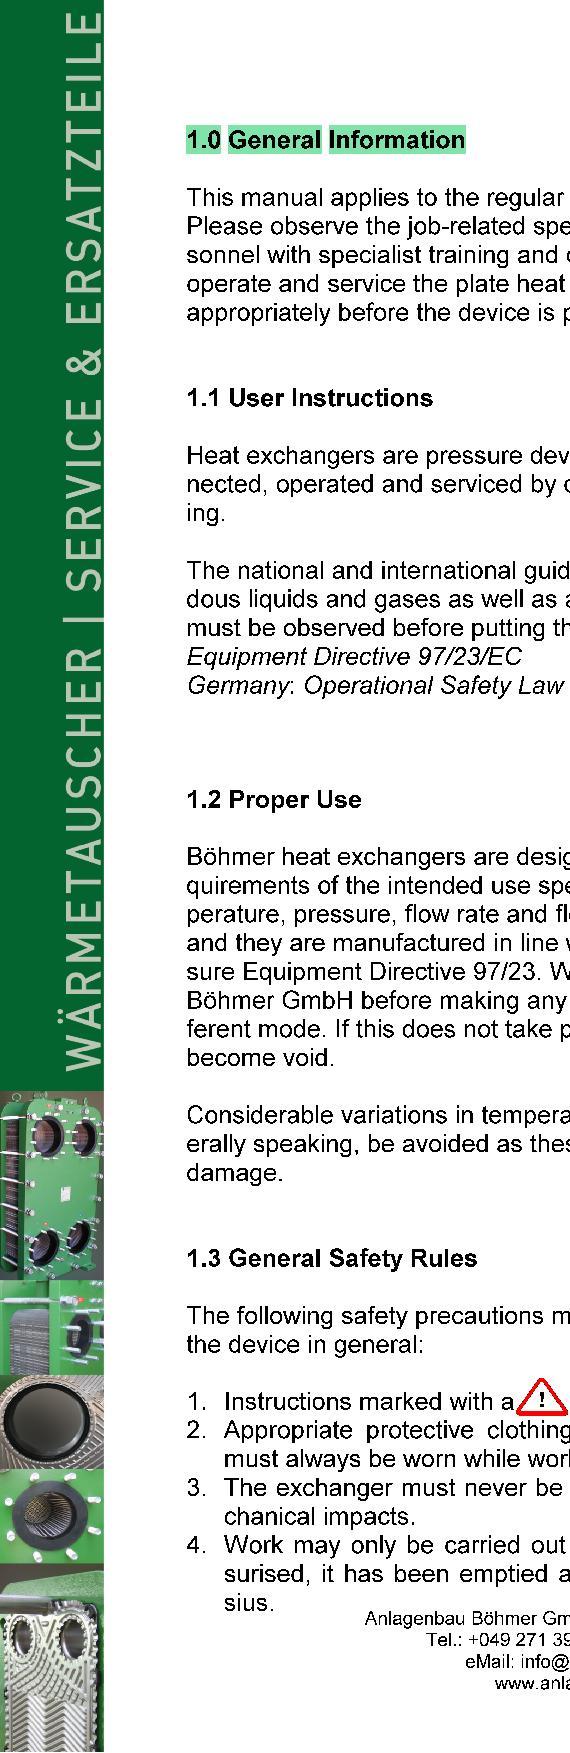 1.0 General Information This manual applies to the regular model of the Böhmer plate heat exchanger. Please observe the job-related specifications in each case.